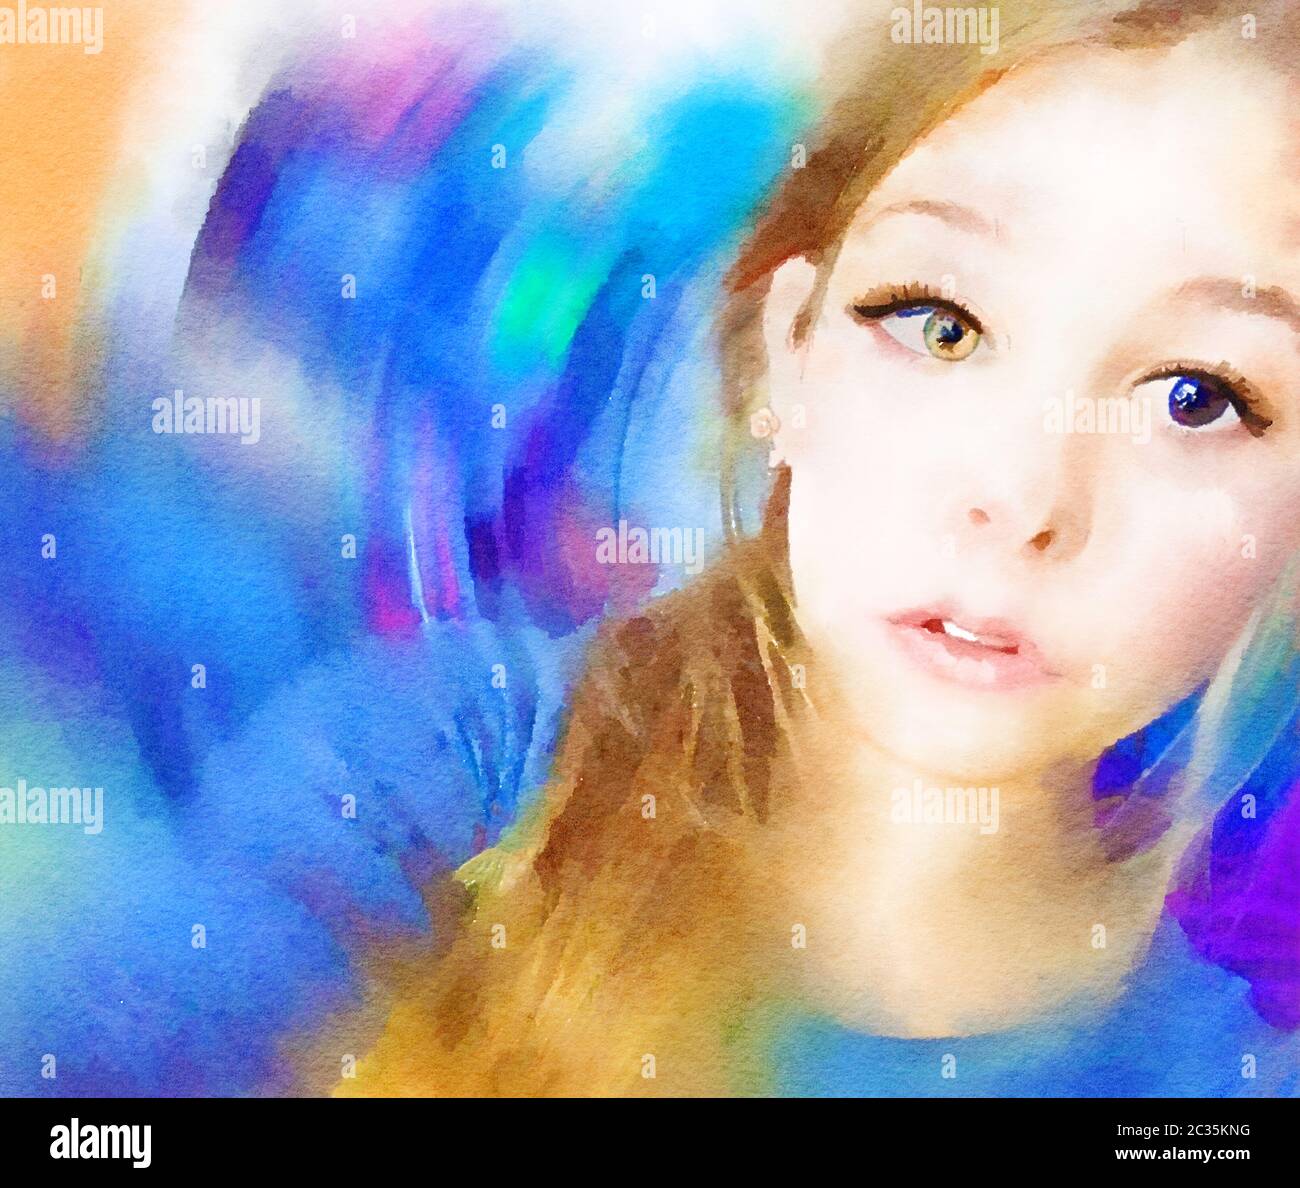 A young girl with two colors of eyes (heterochromia) is seen in this watercolor illustration with copy space and a colorful background. Stock Photo